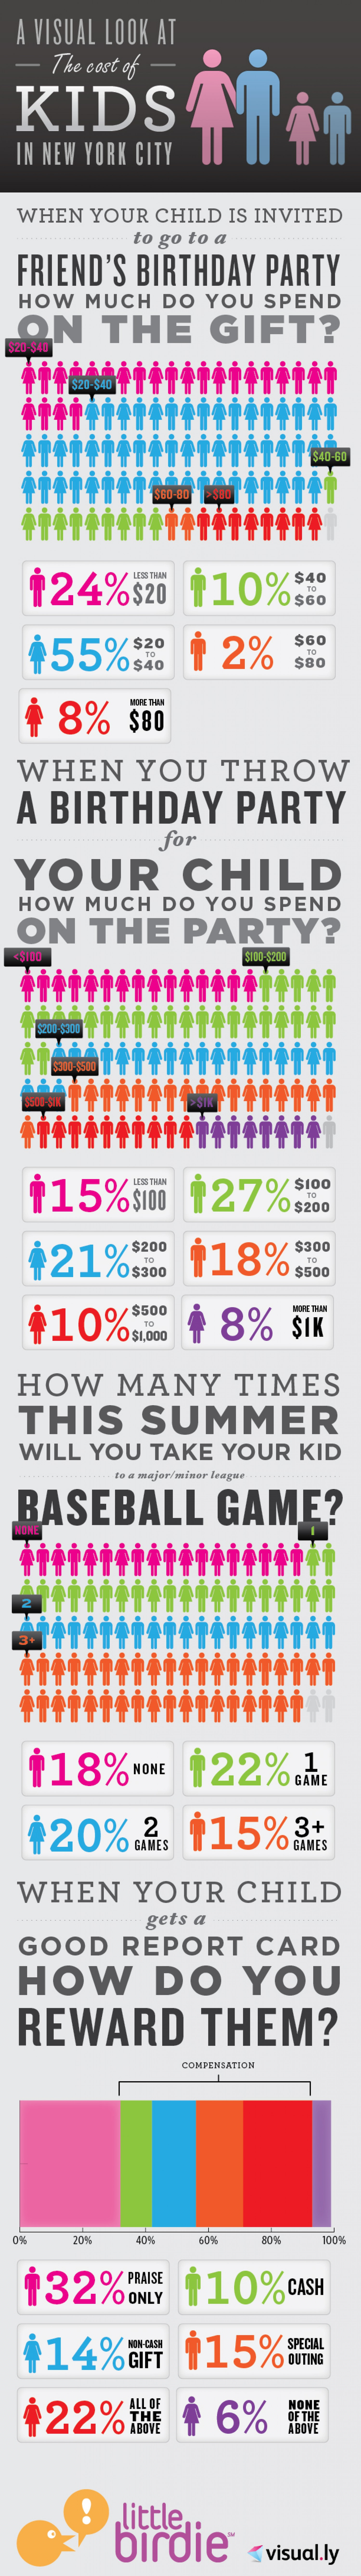 A Visual Look At The Cost of Kids in New York City